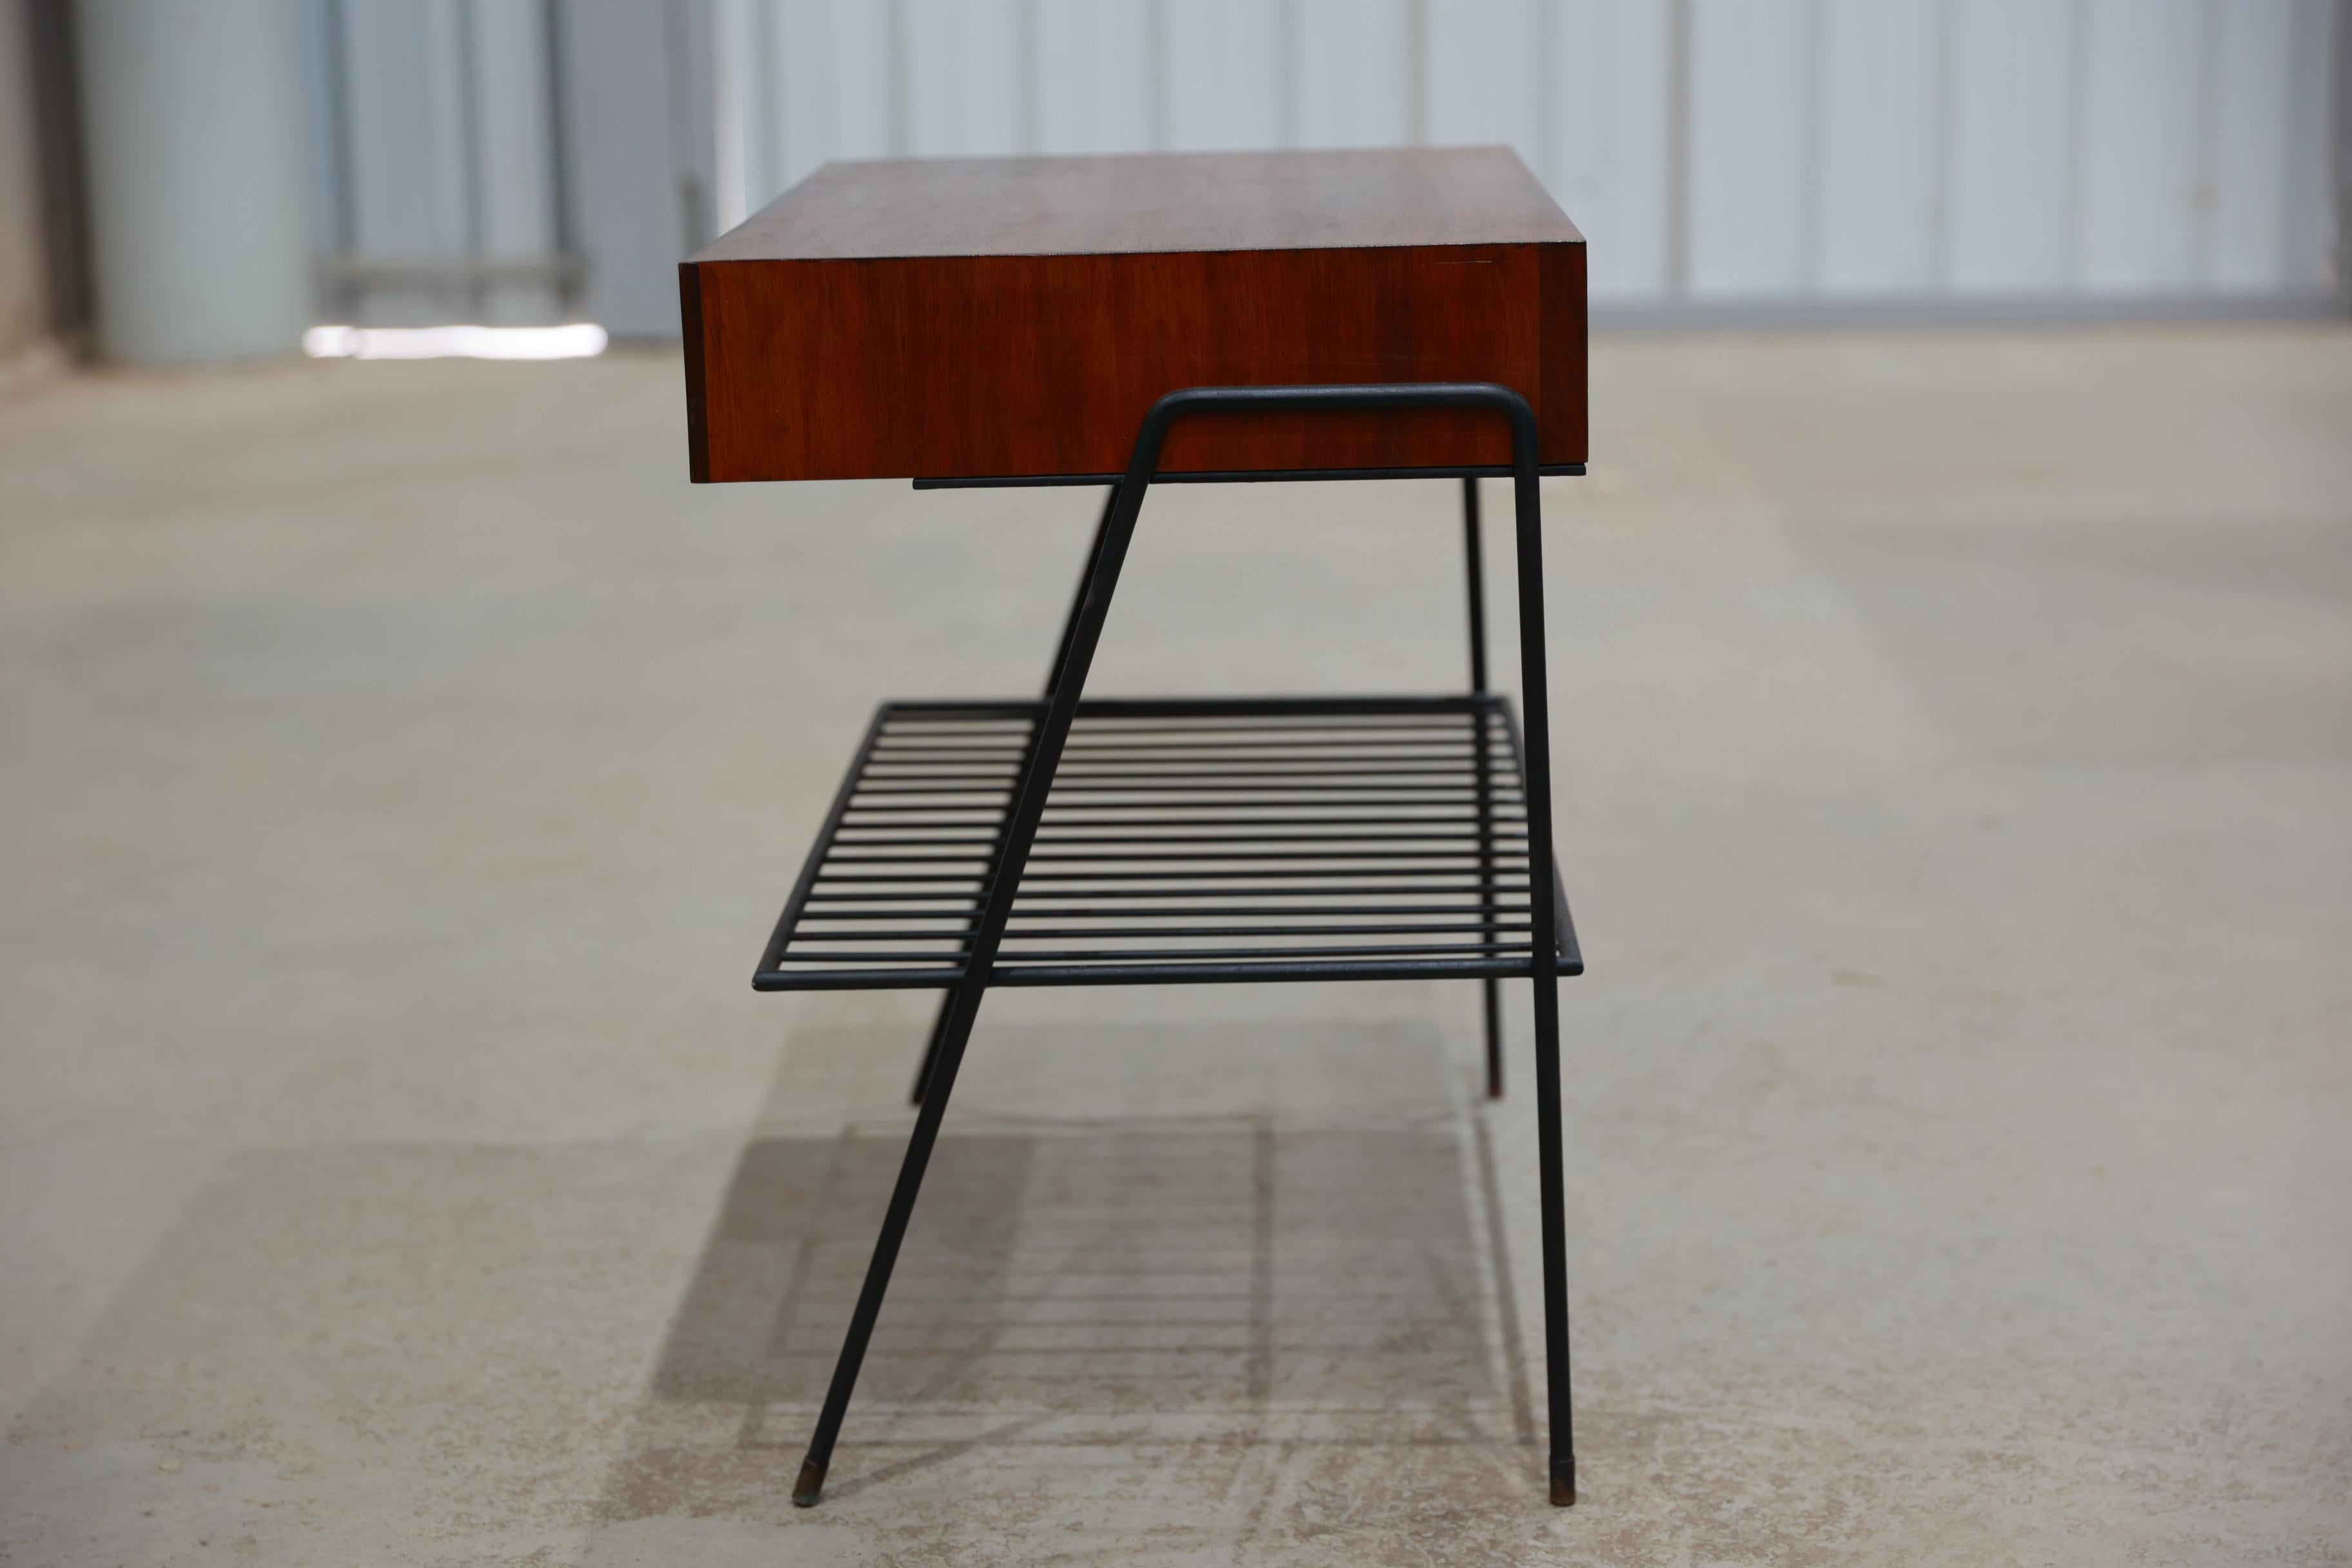 Mid-Century Modern Brazilian Modern Side table in Hardwood and Metal, Unknown, c. 1950 For Sale